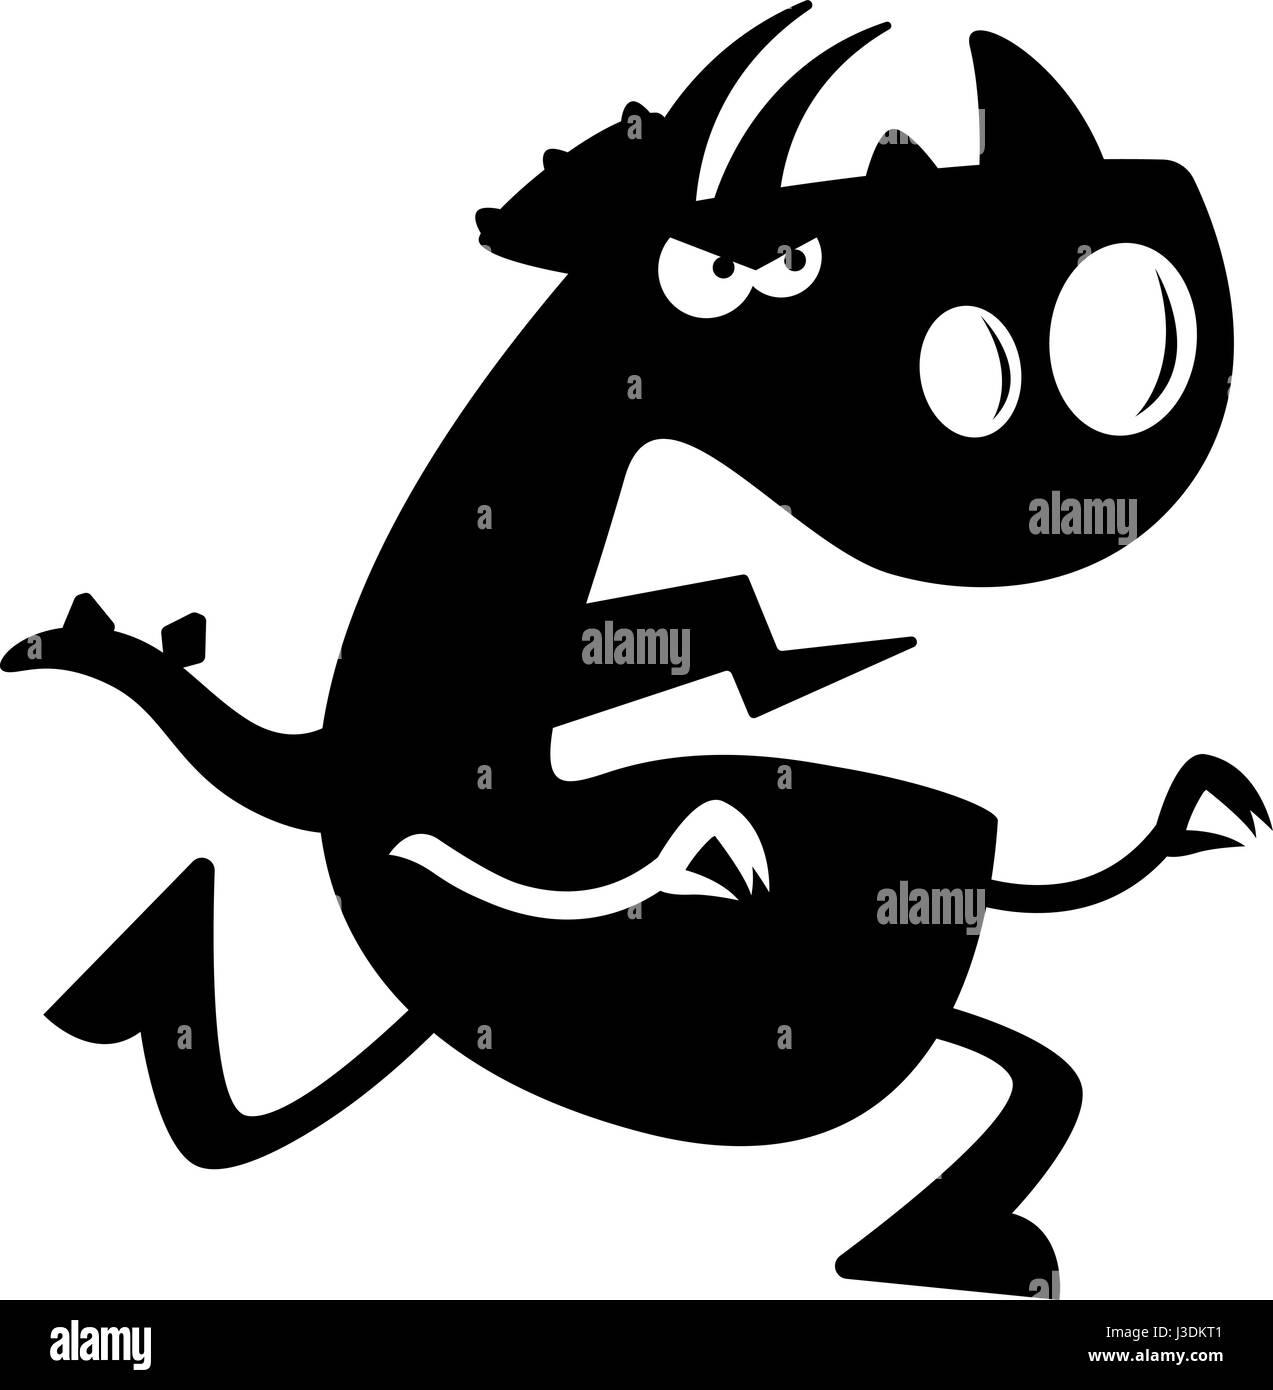 A cartoon silhouette of a triceratops dinosaur charging forward. Stock Vector